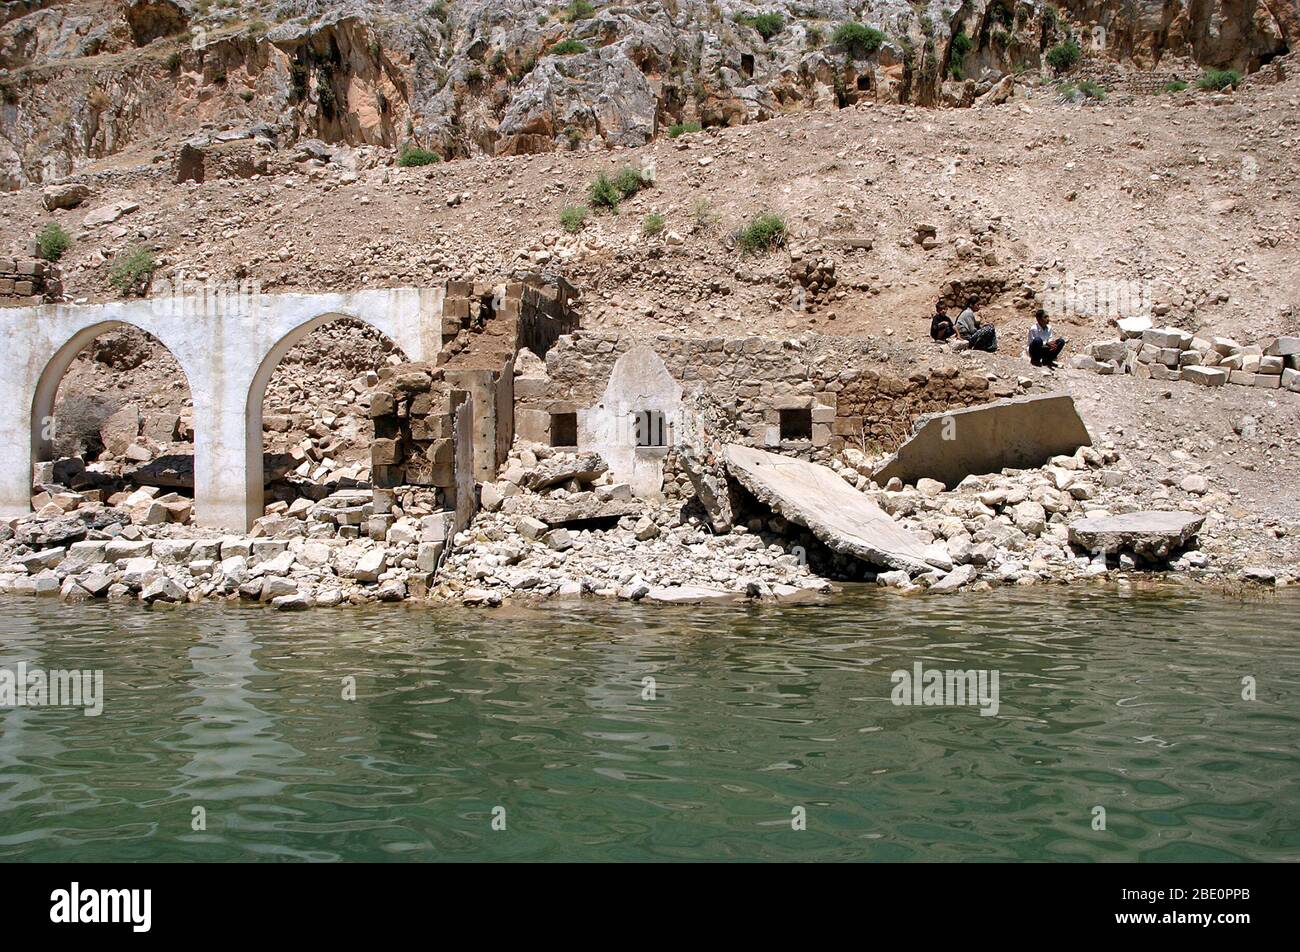 FIRAT RIVER, TURKEY - JANUARY 06: Villagers waiting river boat in Firat River Coastline (Euphrates River) on January 06, 2000 in Gaziantep, Turkey. Stock Photo